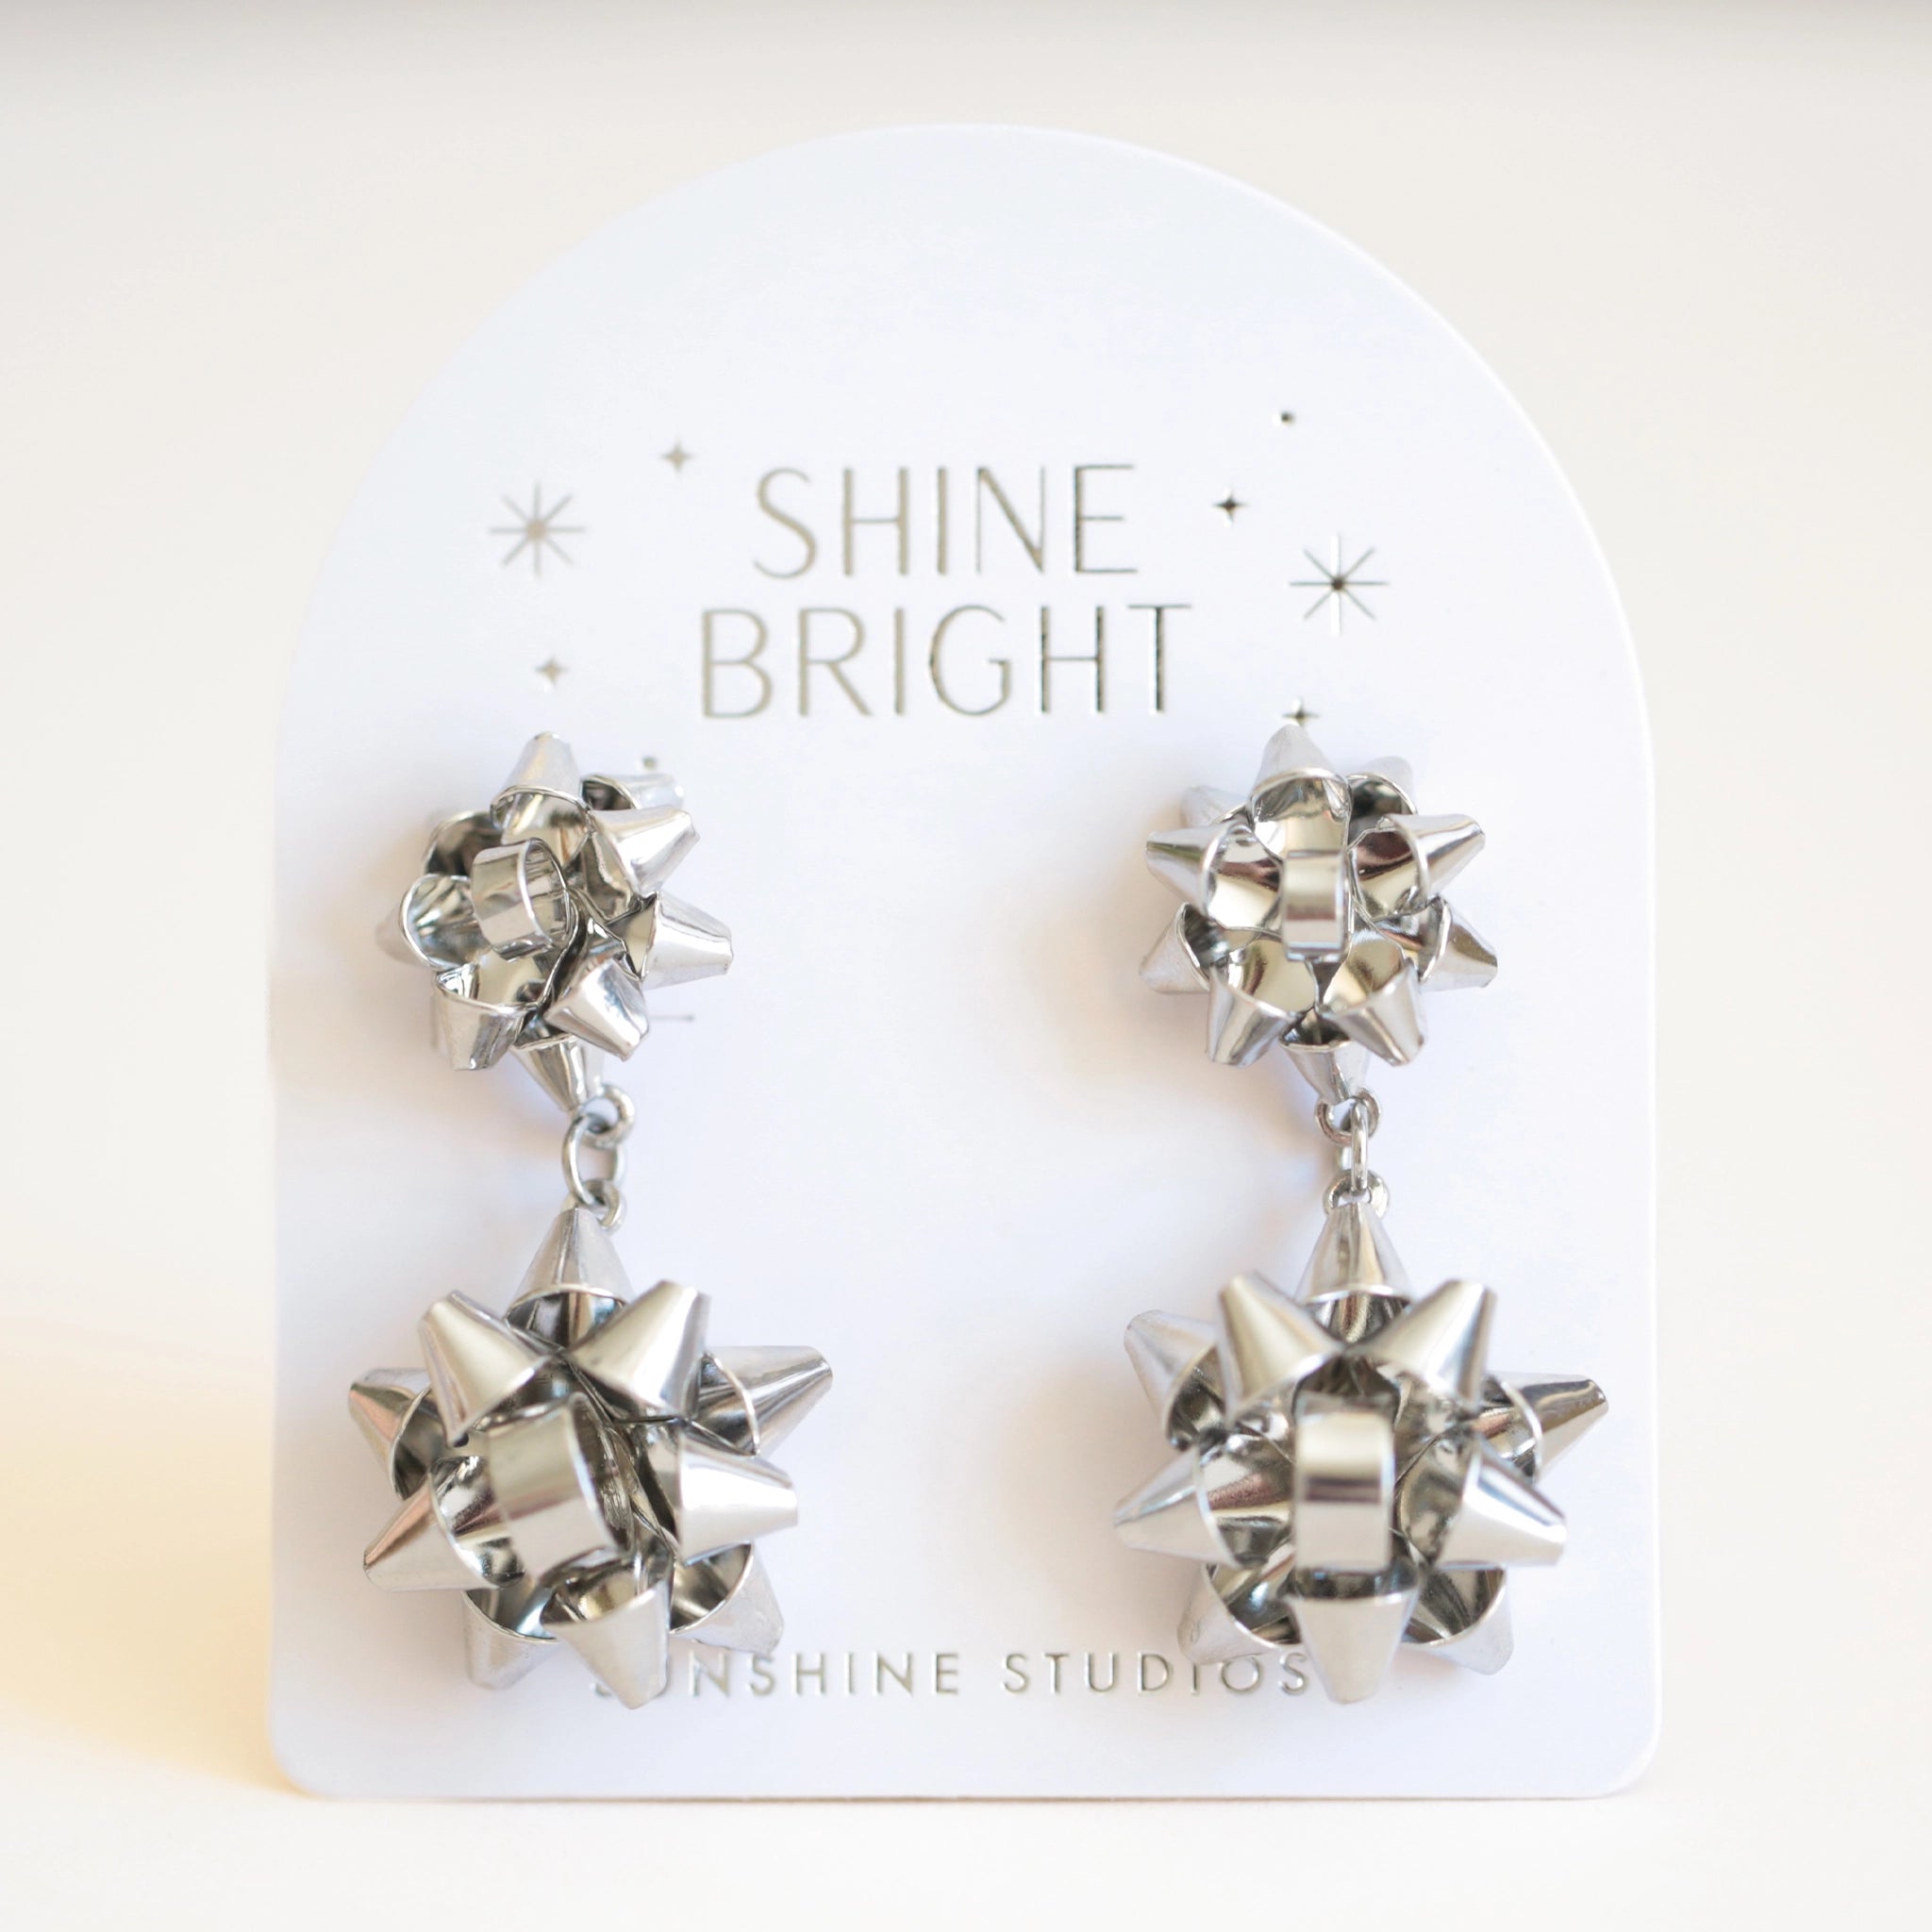 On an ivory background is a pair of silver holiday bow shaped earrings that have a smaller gold bow and a dangling larger bow attached to the bottom. The packaging reads, &quot;Shine Bright Sunshine Studios&quot;.